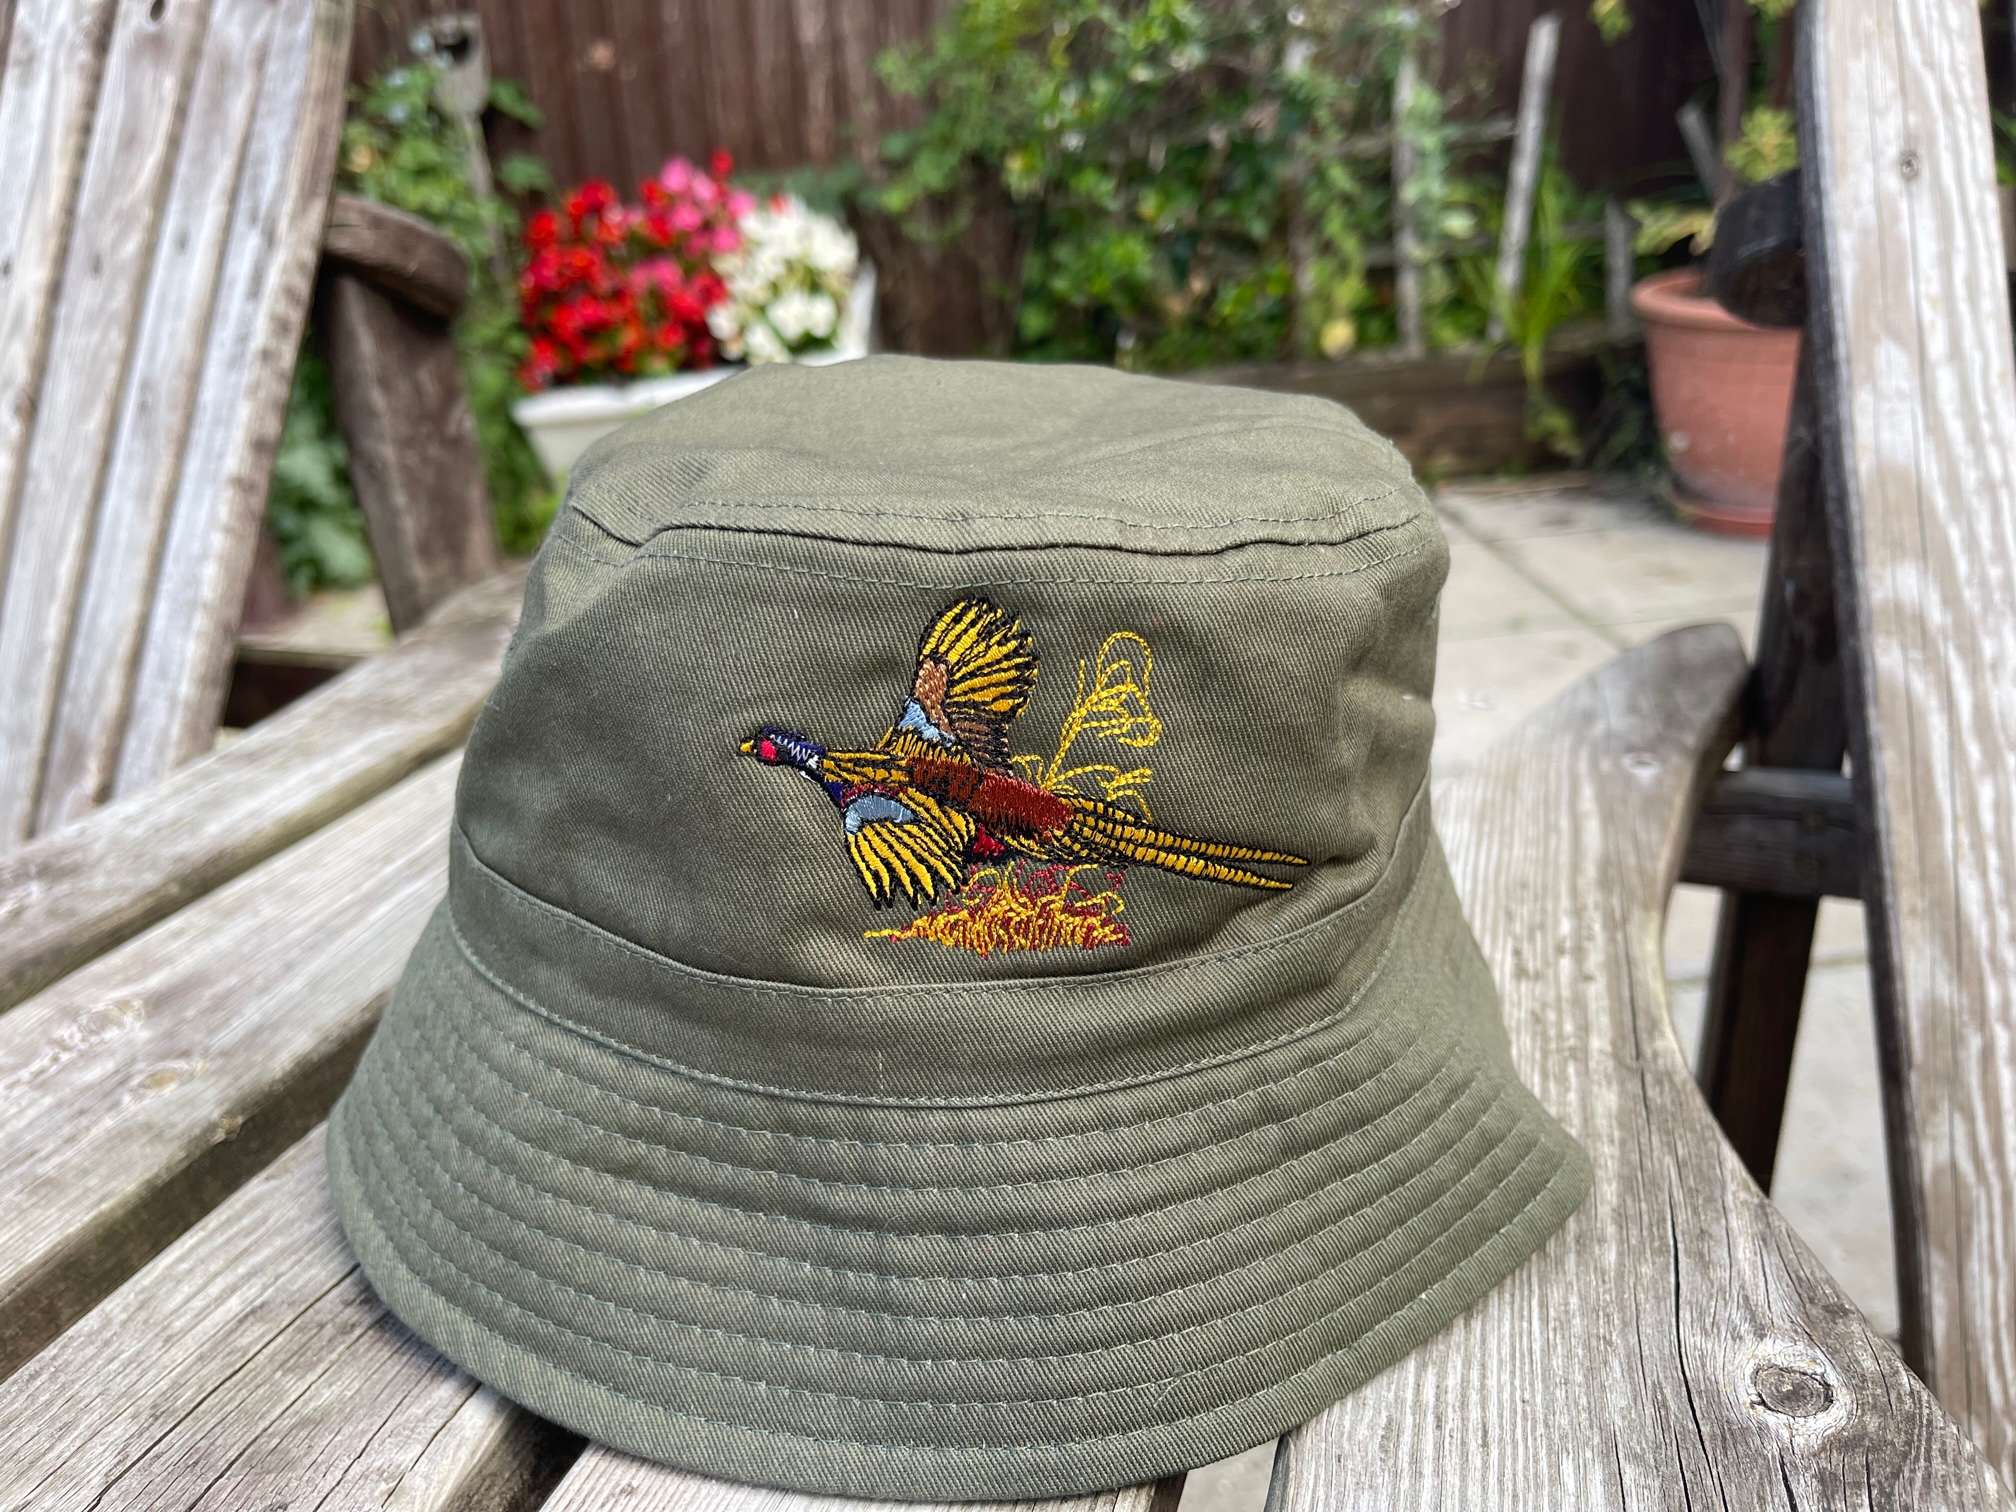 IMG 7200 1 Bucket Hat with Pheasant embroidery logo. Available in French Navy / White underside, Olive Green / Stone underside & Black / Light Grey Underside 100% Cotton Twill Short brim. Stitched ventilation eyelets. BSCI certified. Reach certified.